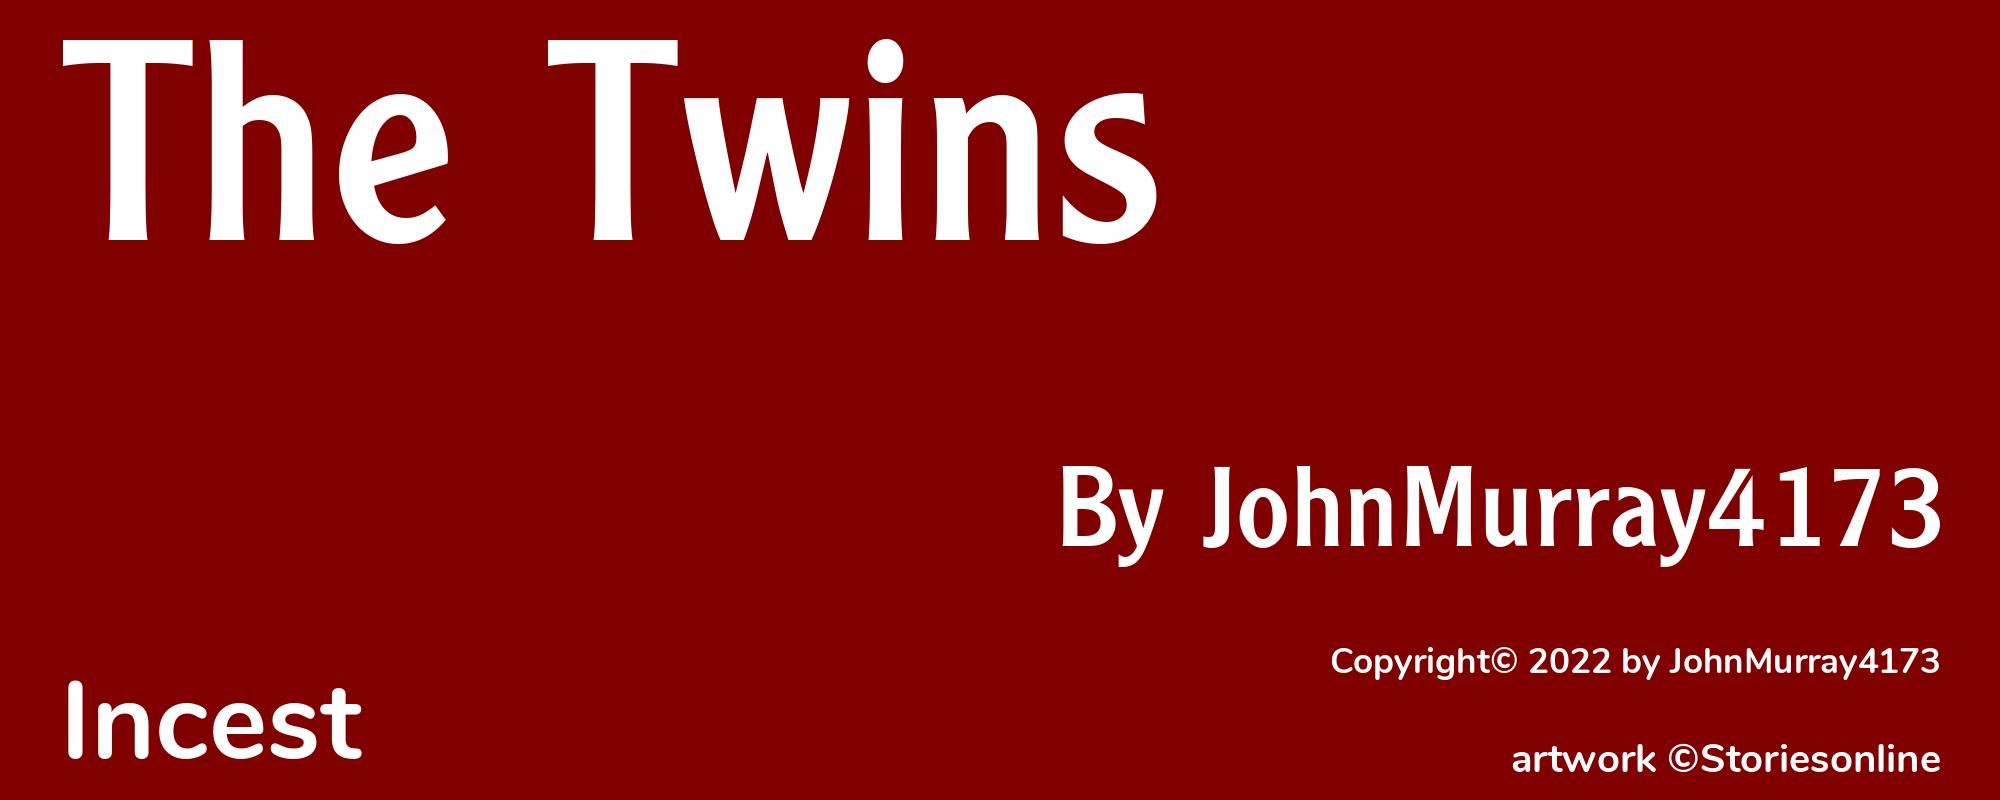 The Twins - Cover